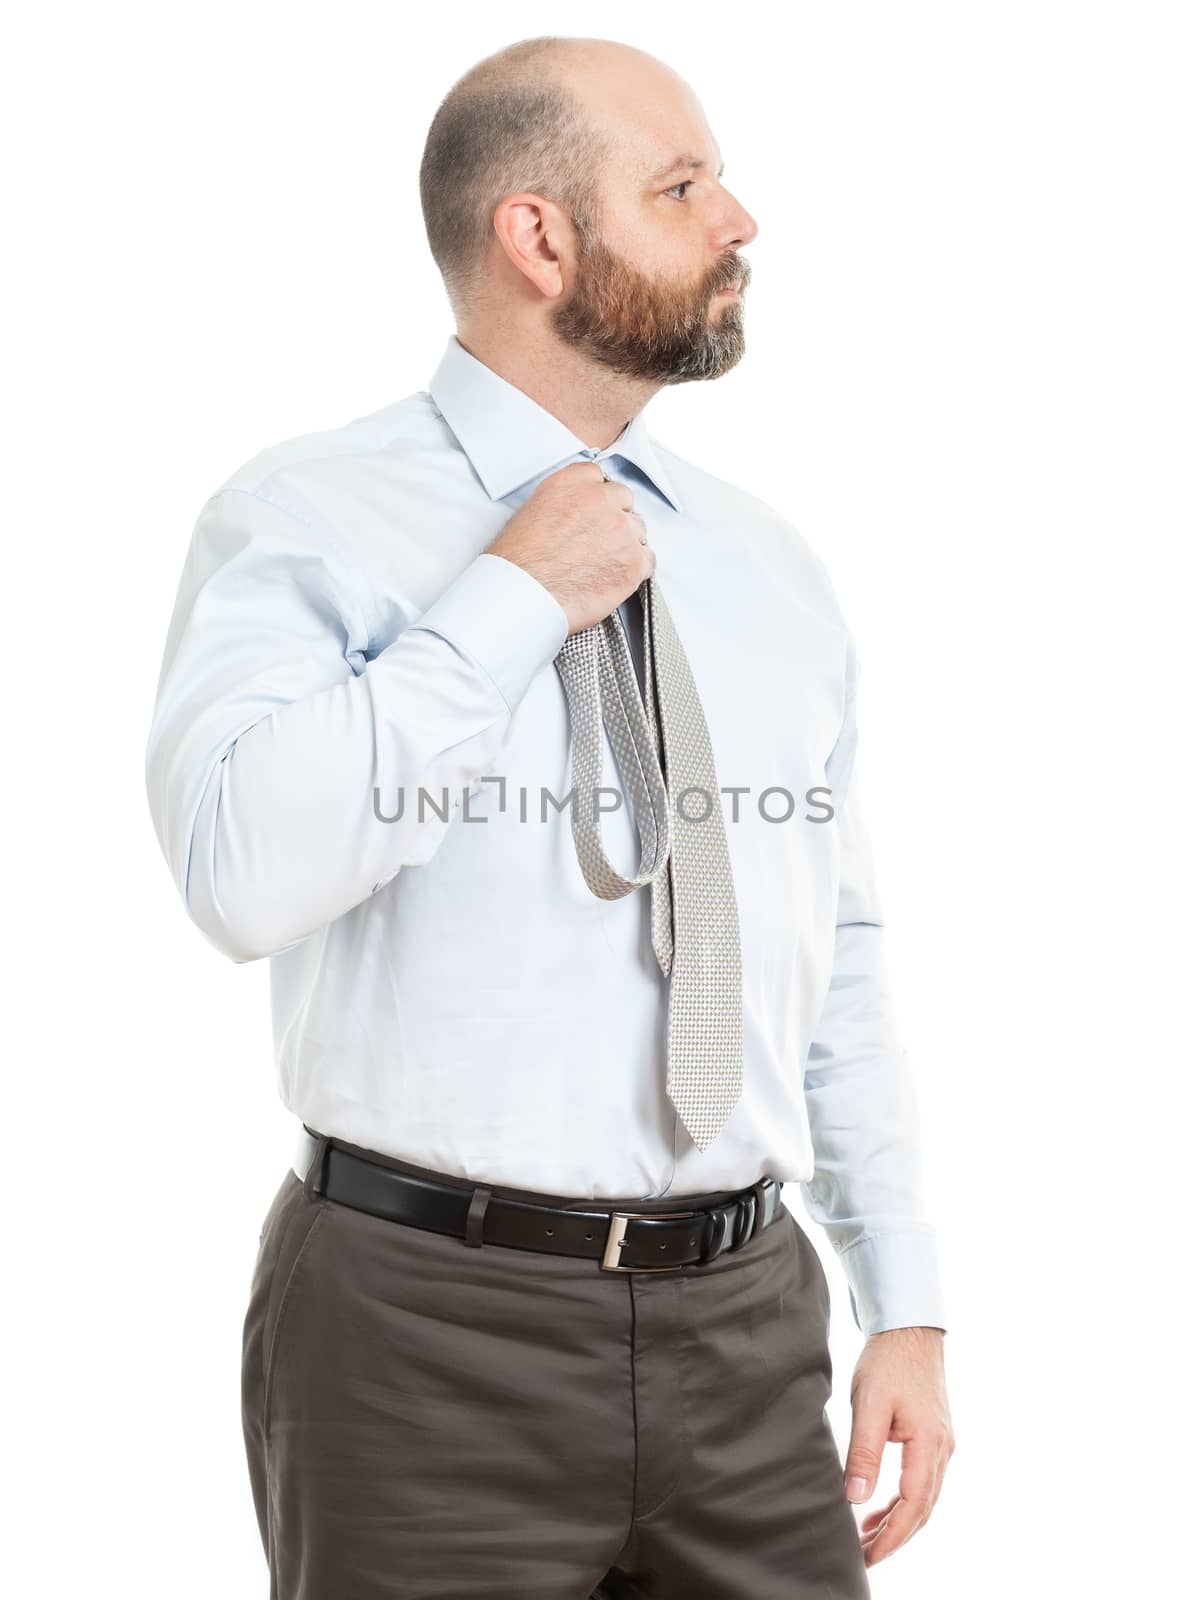 An image of a handsome business man who chooses a tie